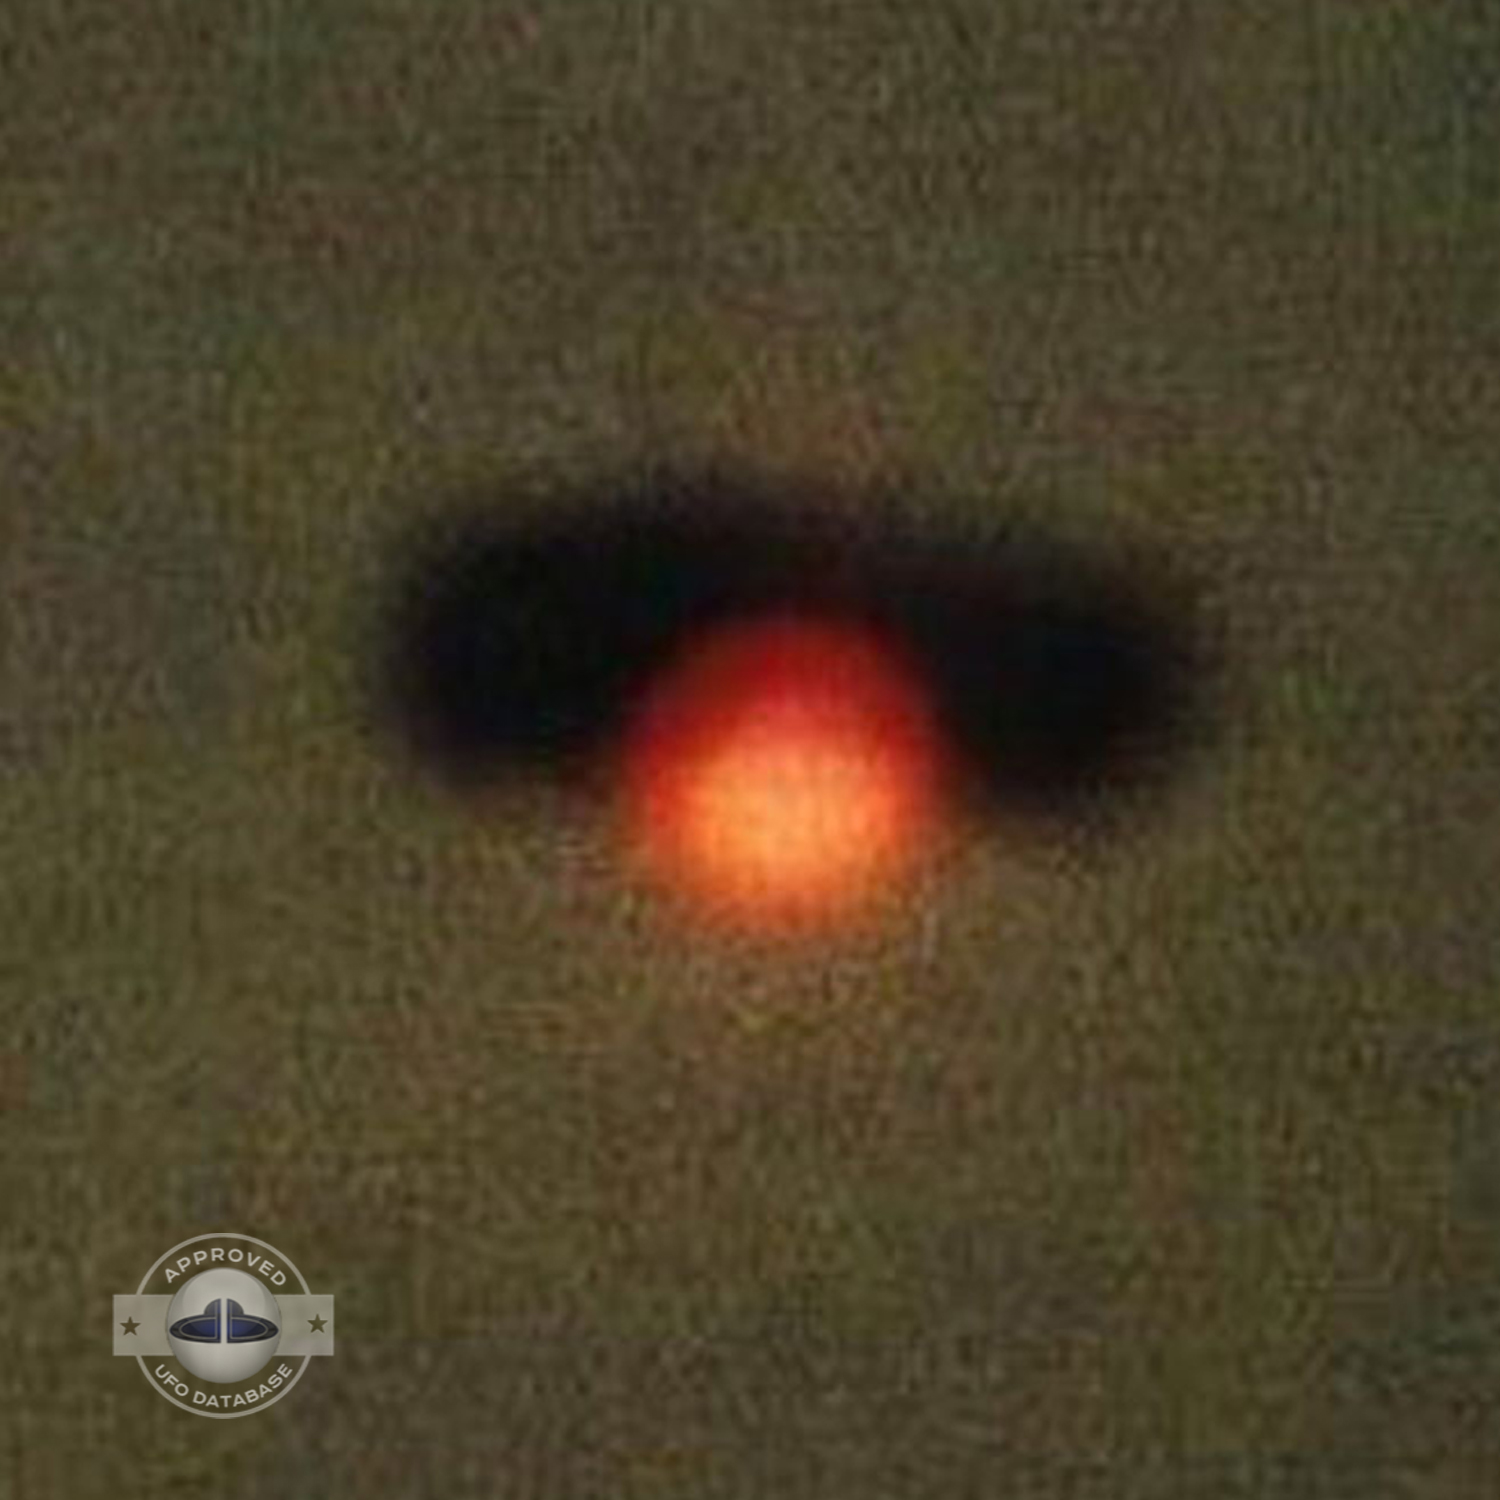 1993 UFO picture - part of The Gulf Breeze UFO incident - Florida USA UFO Picture #133-3